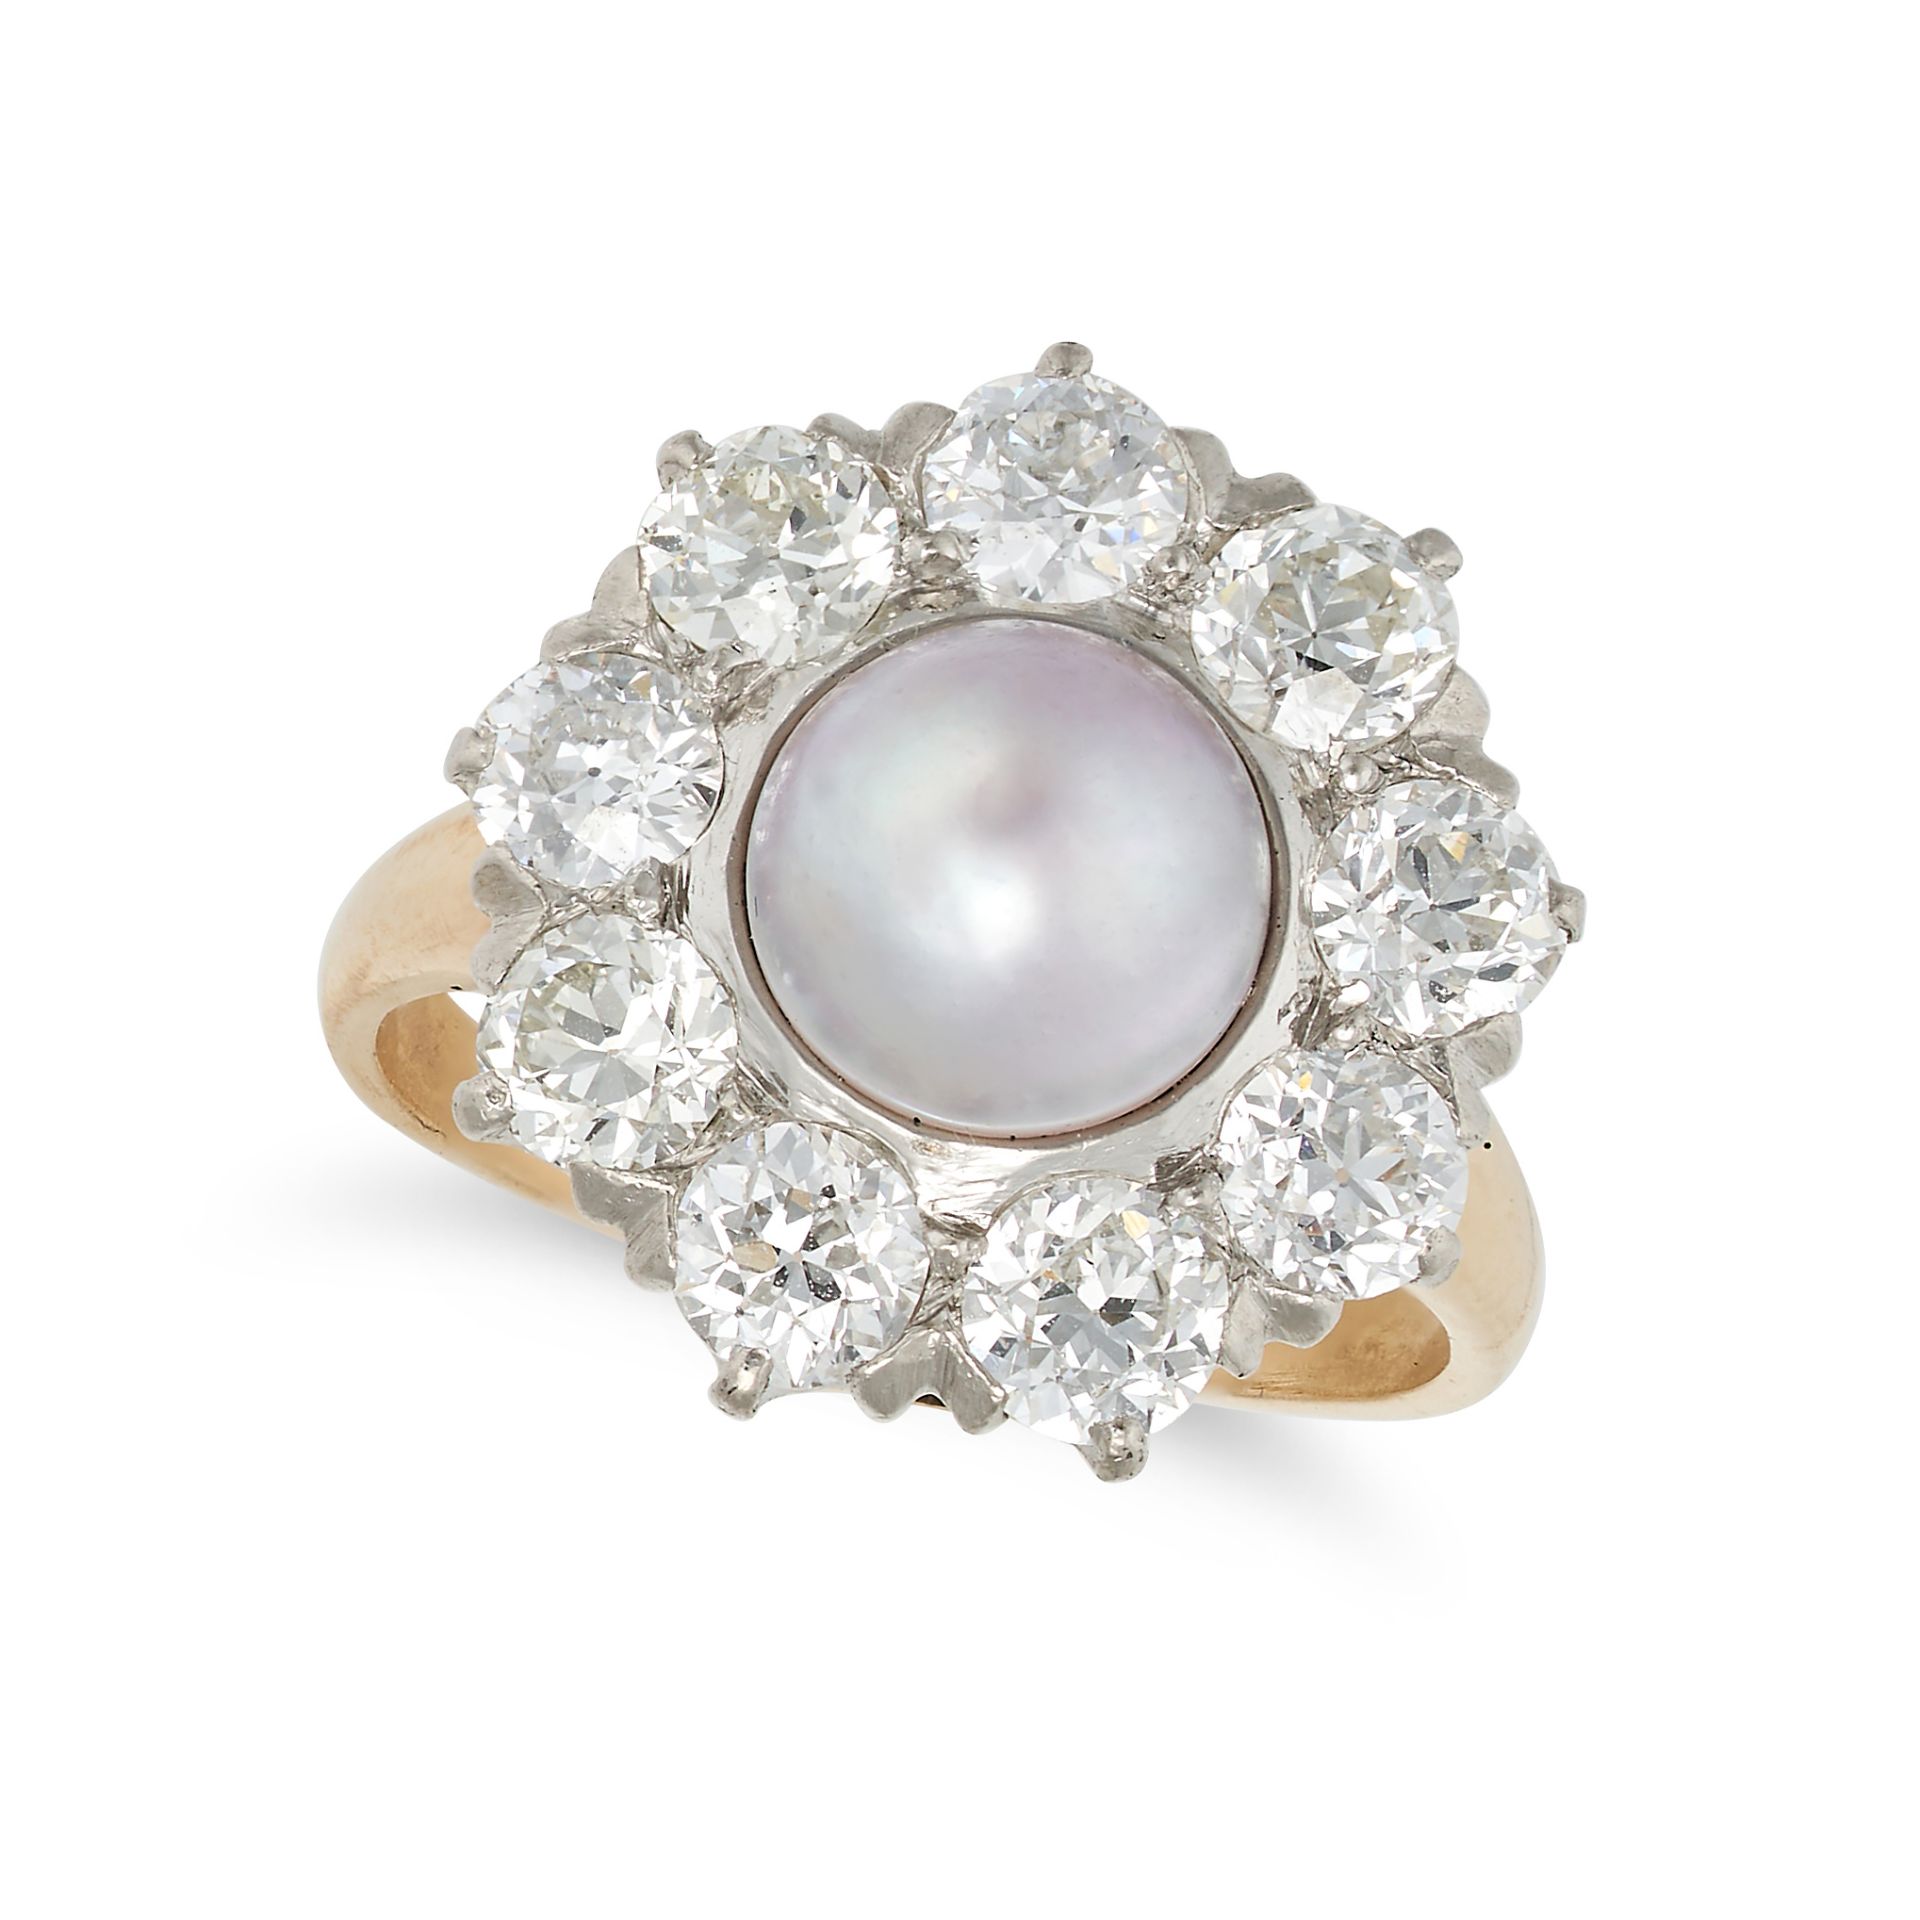 A PEARL AND DIAMOND CLUSTER RING in yellow gold, set with a pearl of 7.2mm in a cluster of old Eu...